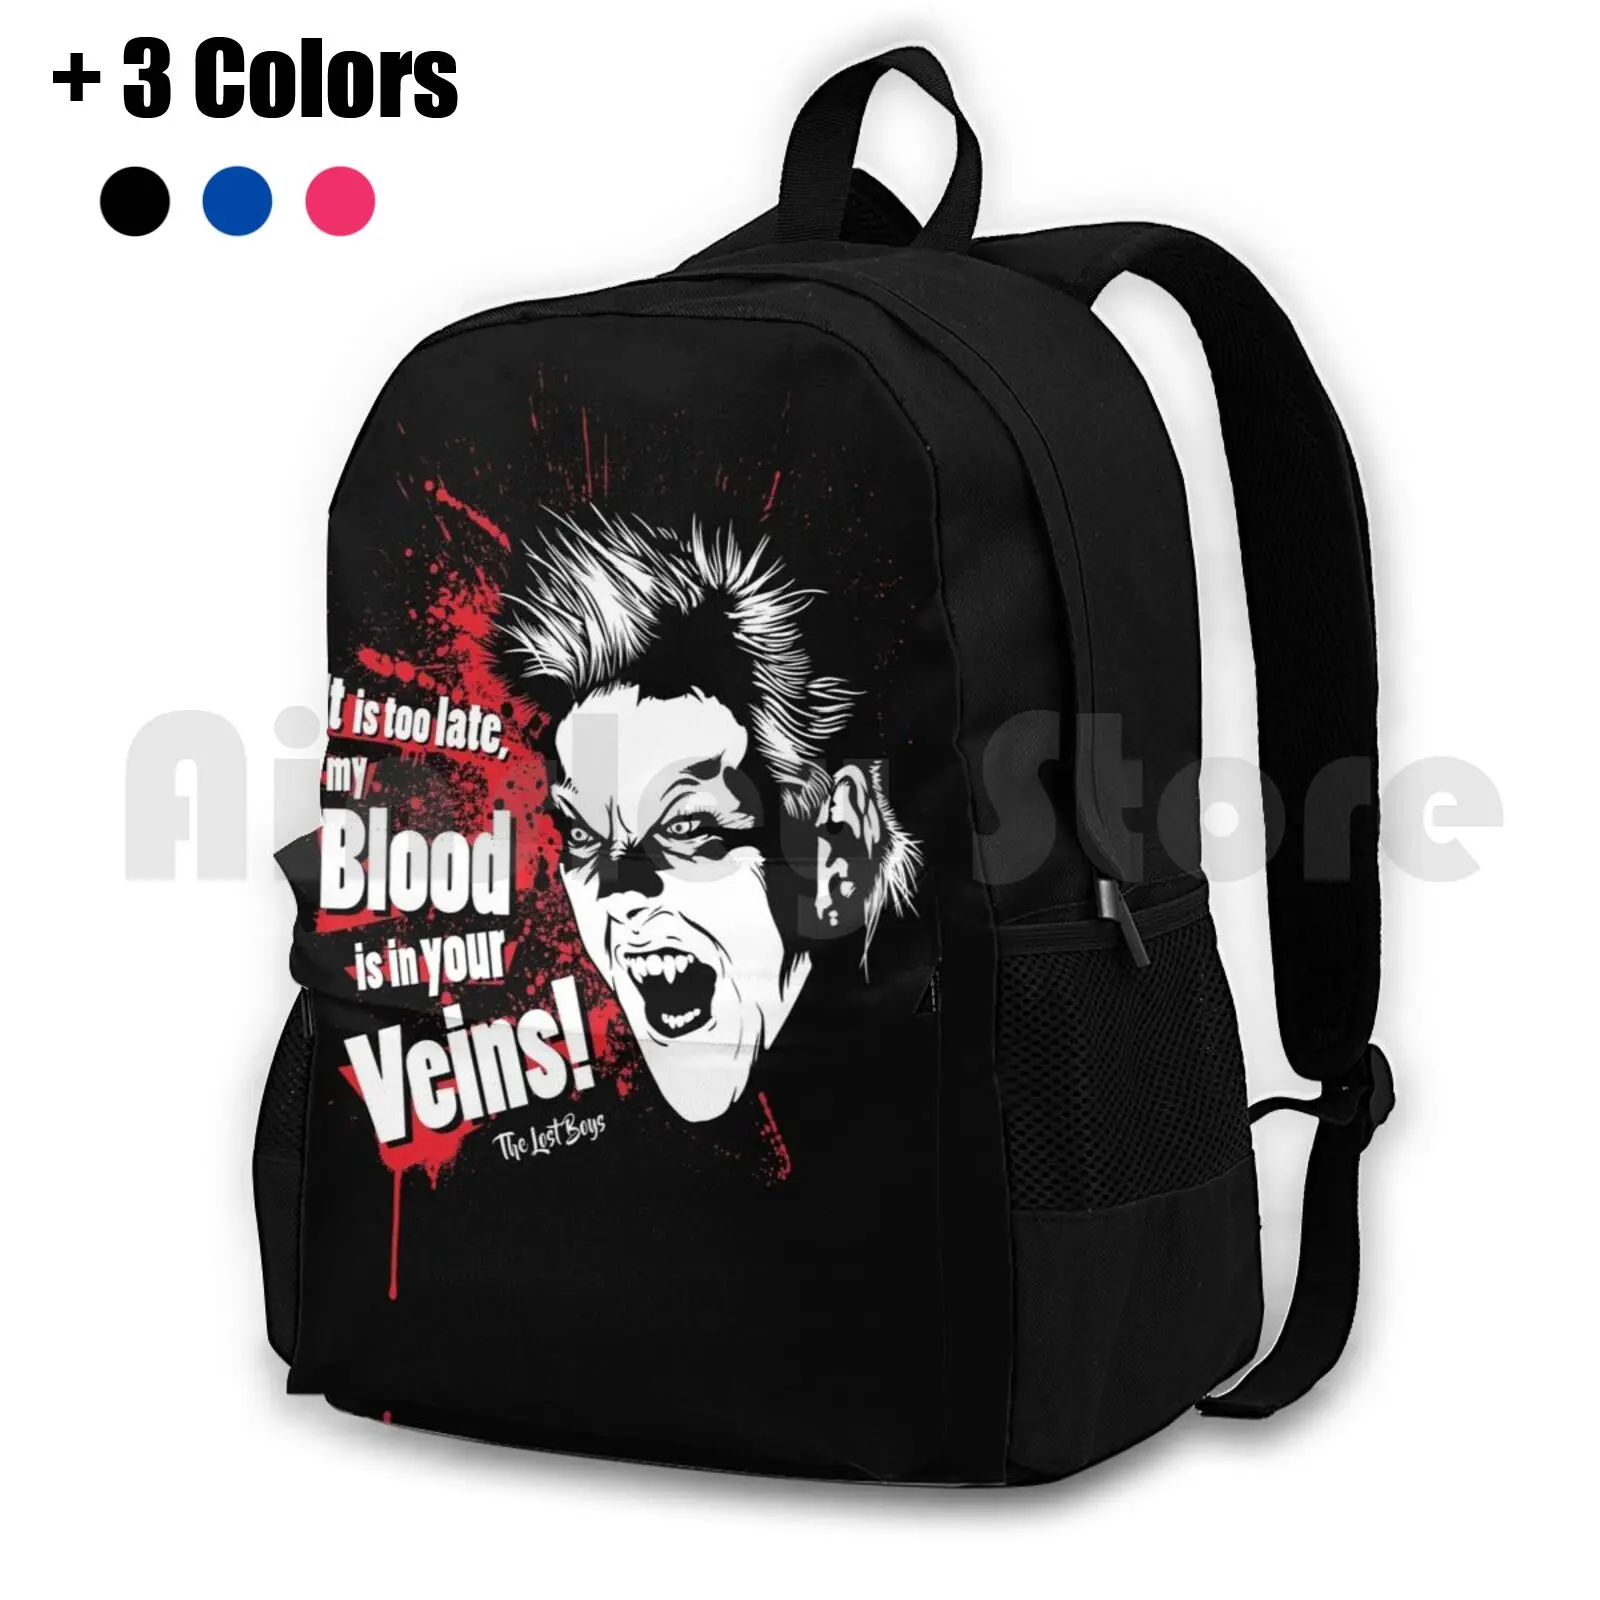 

It Is Too Late , My Blood Is In Your Veins! Outdoor Hiking Backpack Waterproof Camping Travel The David Vampires Vampires 80S